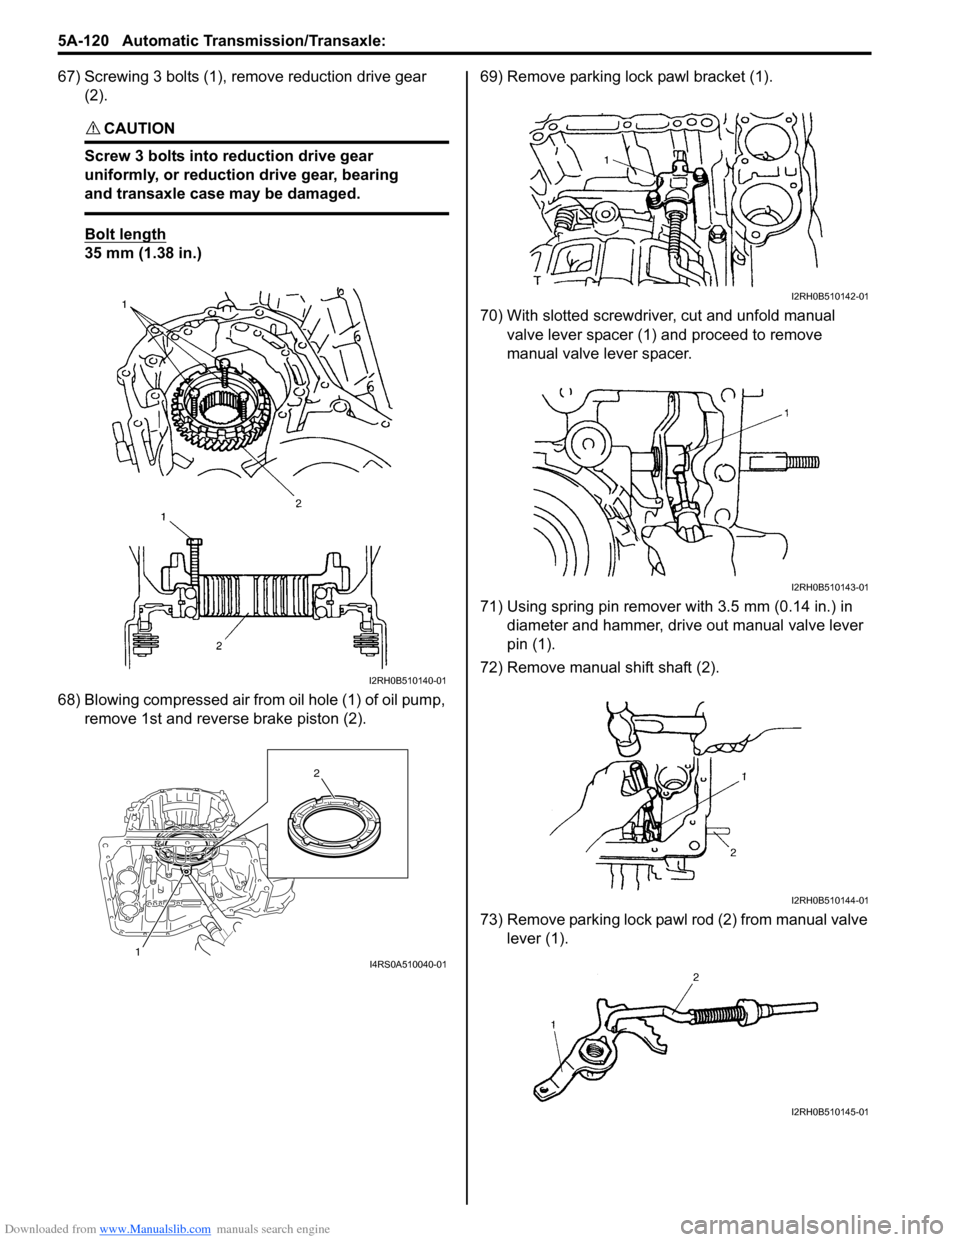 SUZUKI SWIFT 2007 2.G Service Owners Guide Downloaded from www.Manualslib.com manuals search engine 5A-120 Automatic Transmission/Transaxle: 
67) Screwing 3 bolts (1), remove reduction drive gear (2).
CAUTION! 
Screw 3 bolts into reduction dri